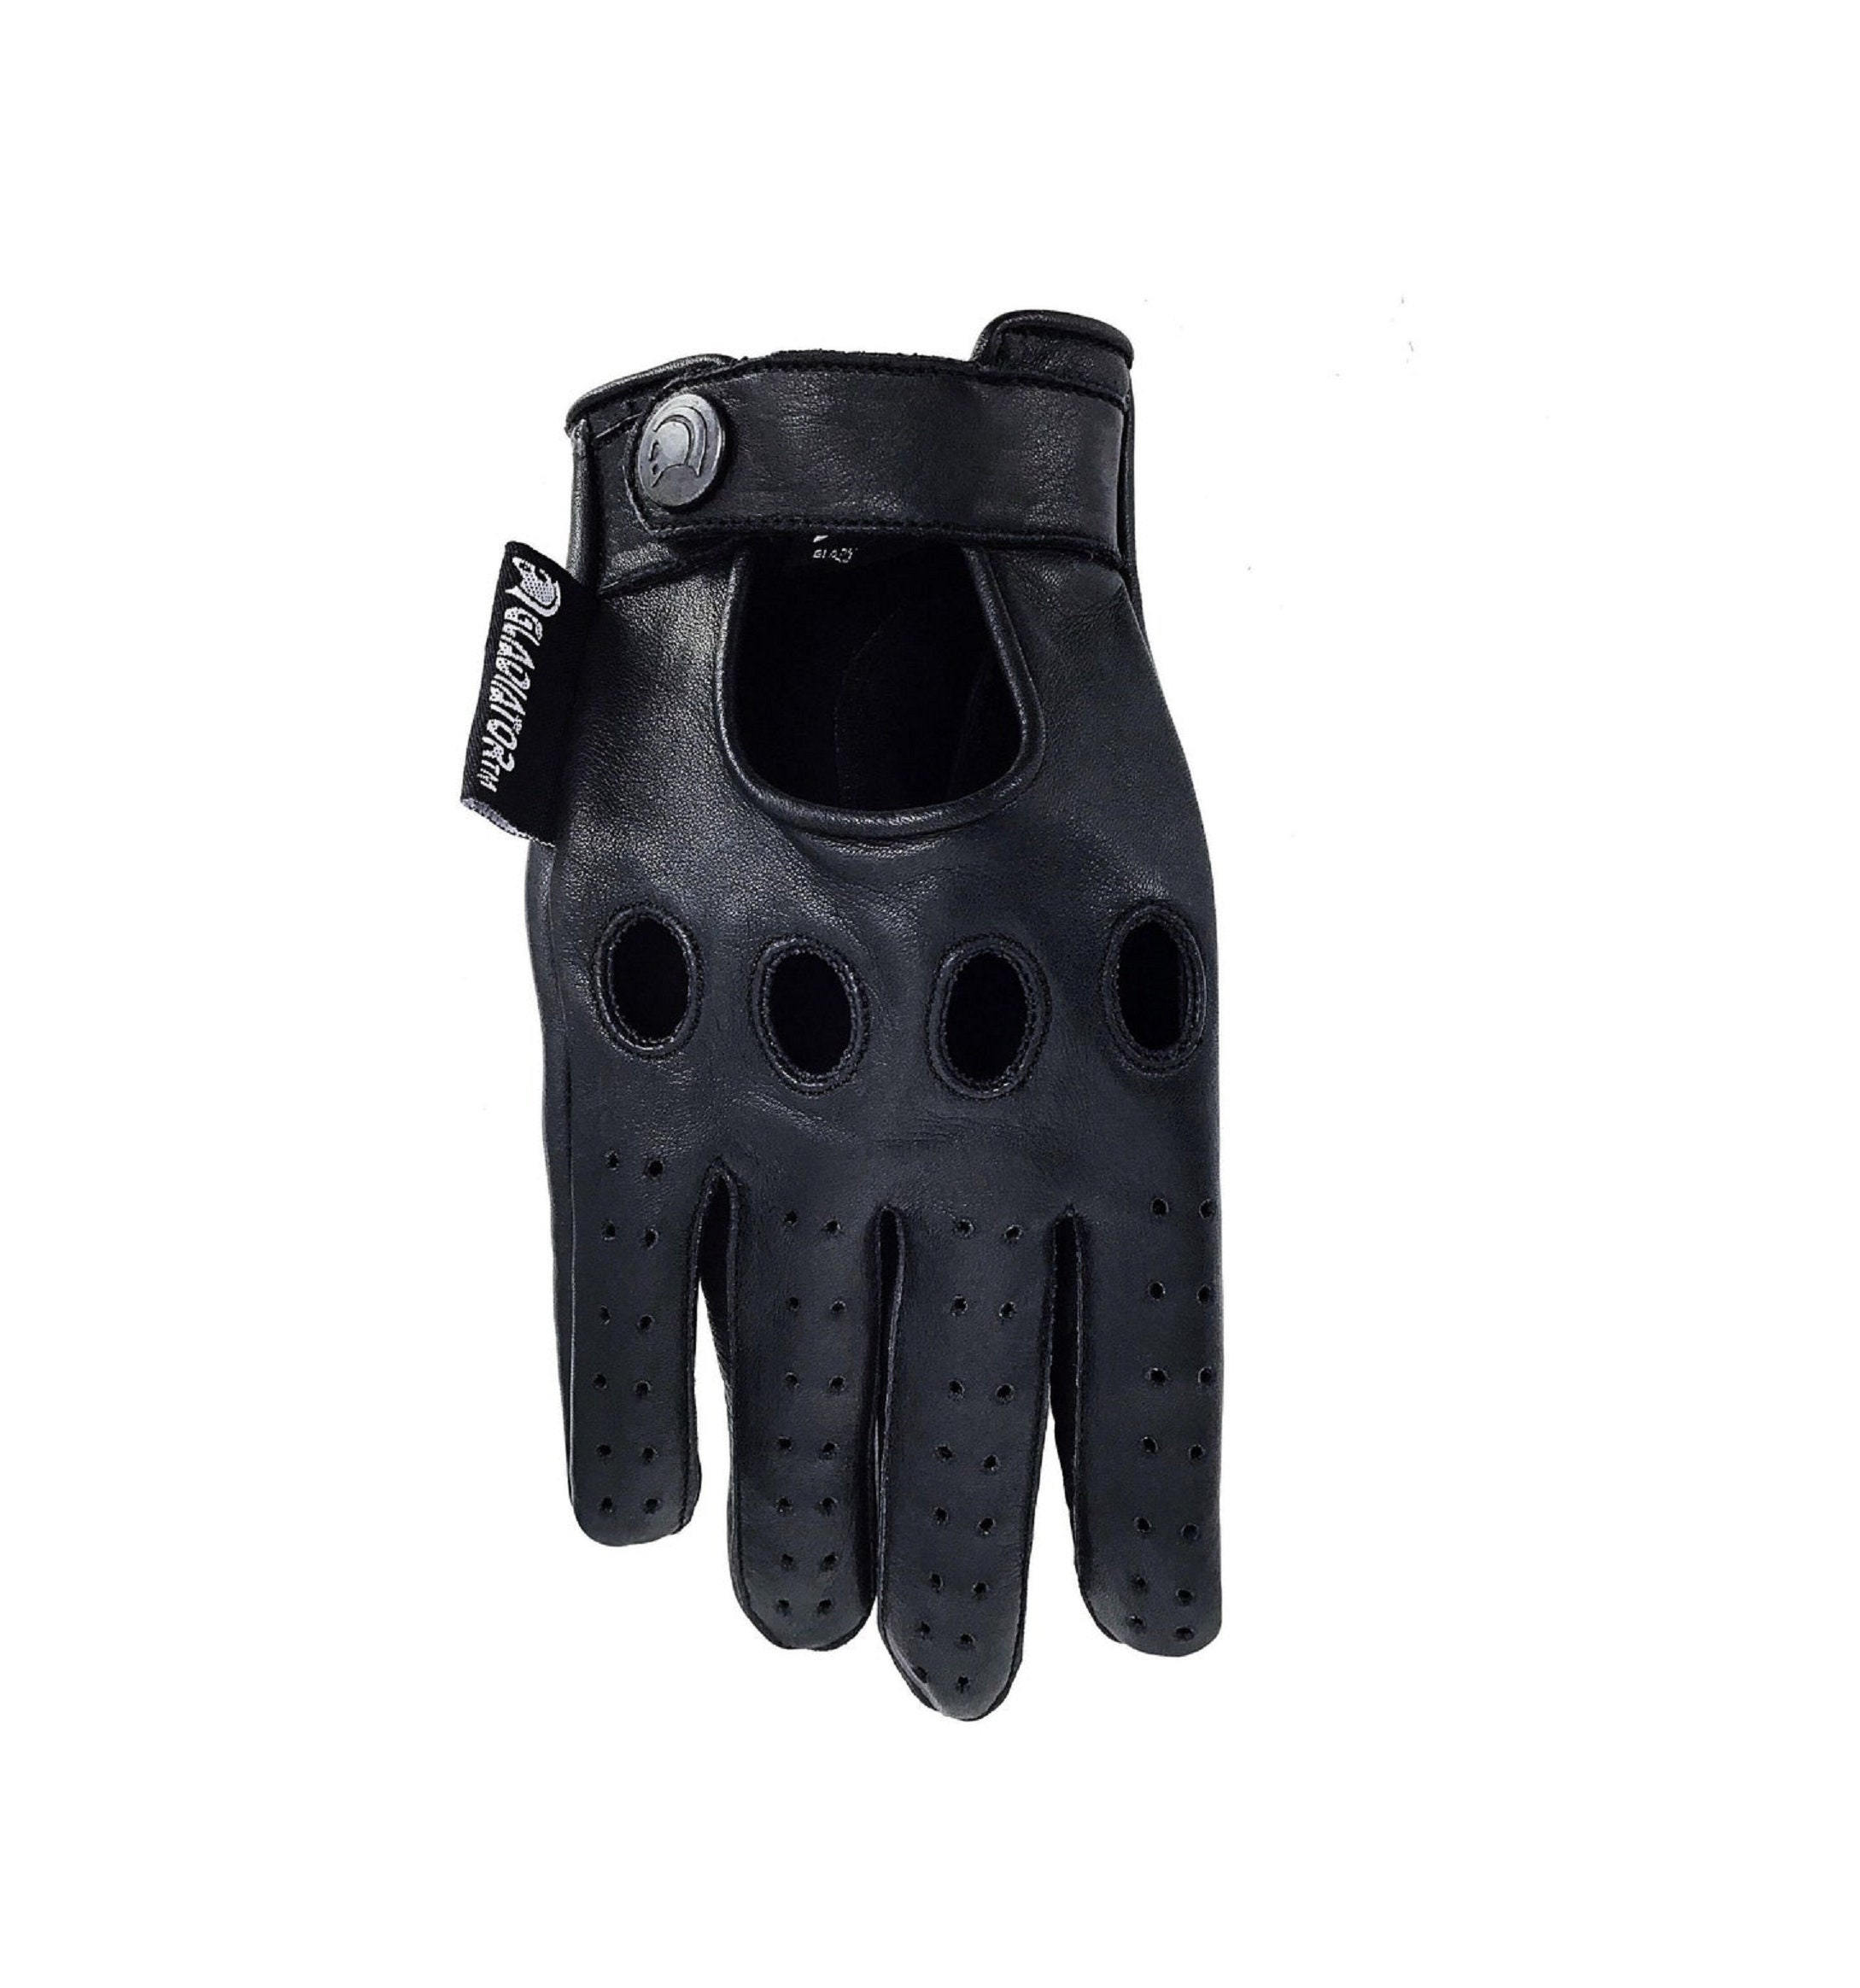 Austrian Army - Lightweight Black Nylon Cycling Gloves - Grade 1 - Forces  Uniform and Kit